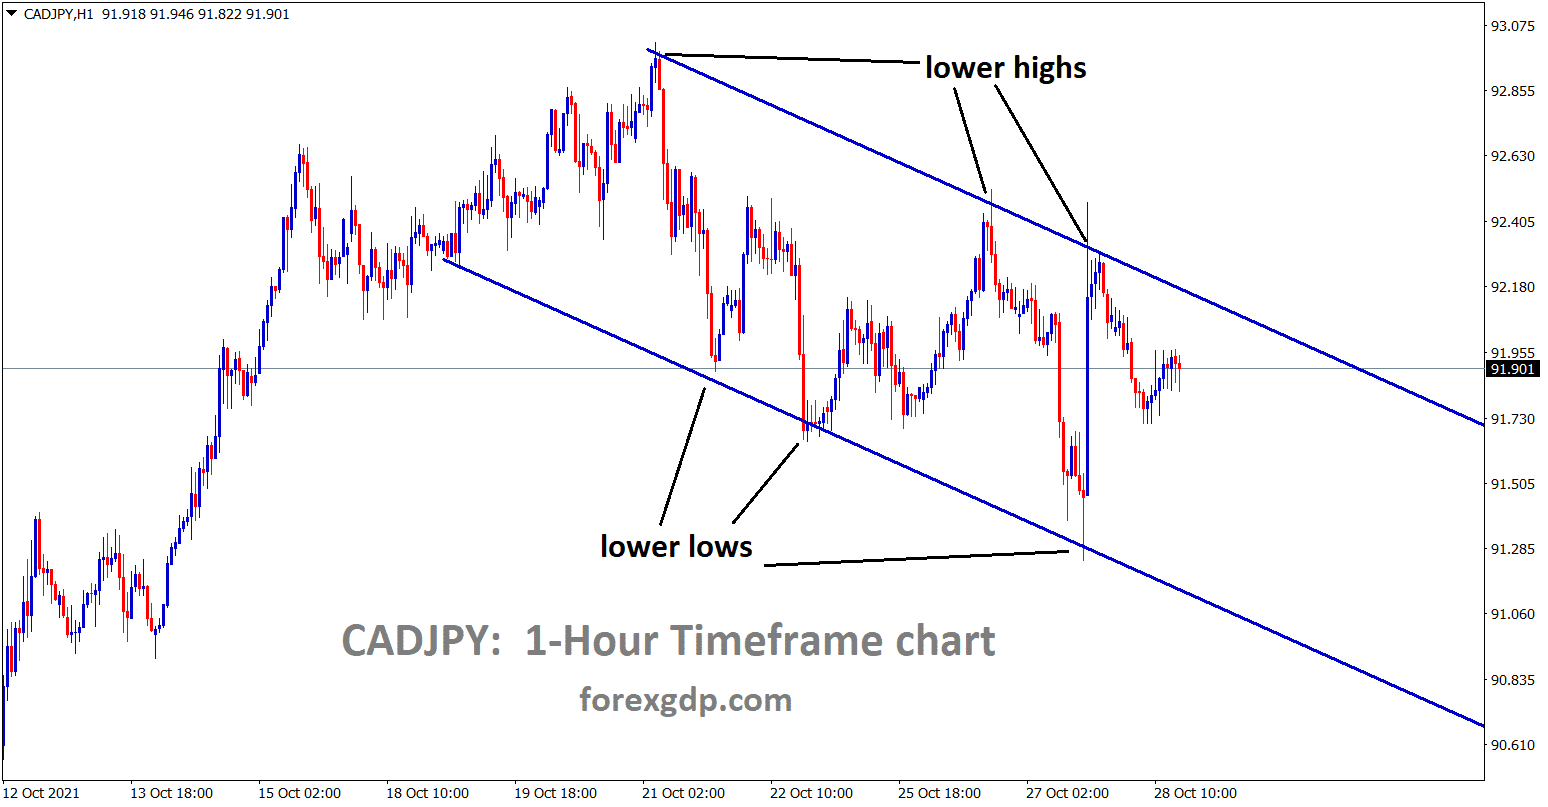 CADJPY is moving in a descending channel and falling from the lower high area of the channel